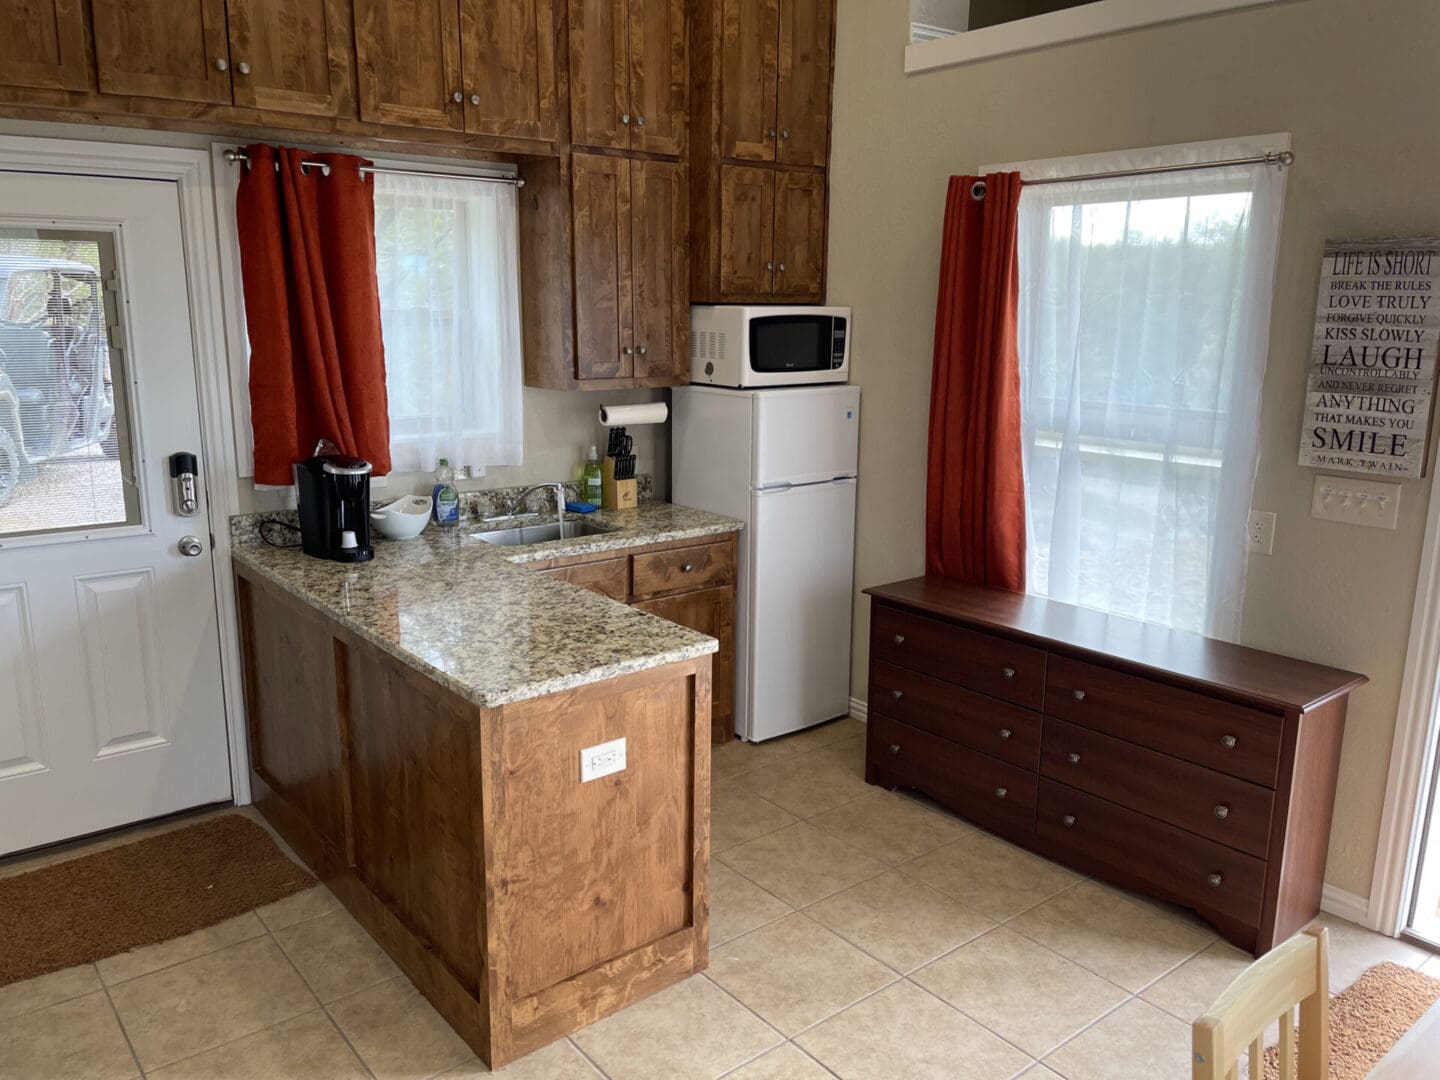 A kitchen with a refrigerator, microwave and sink.